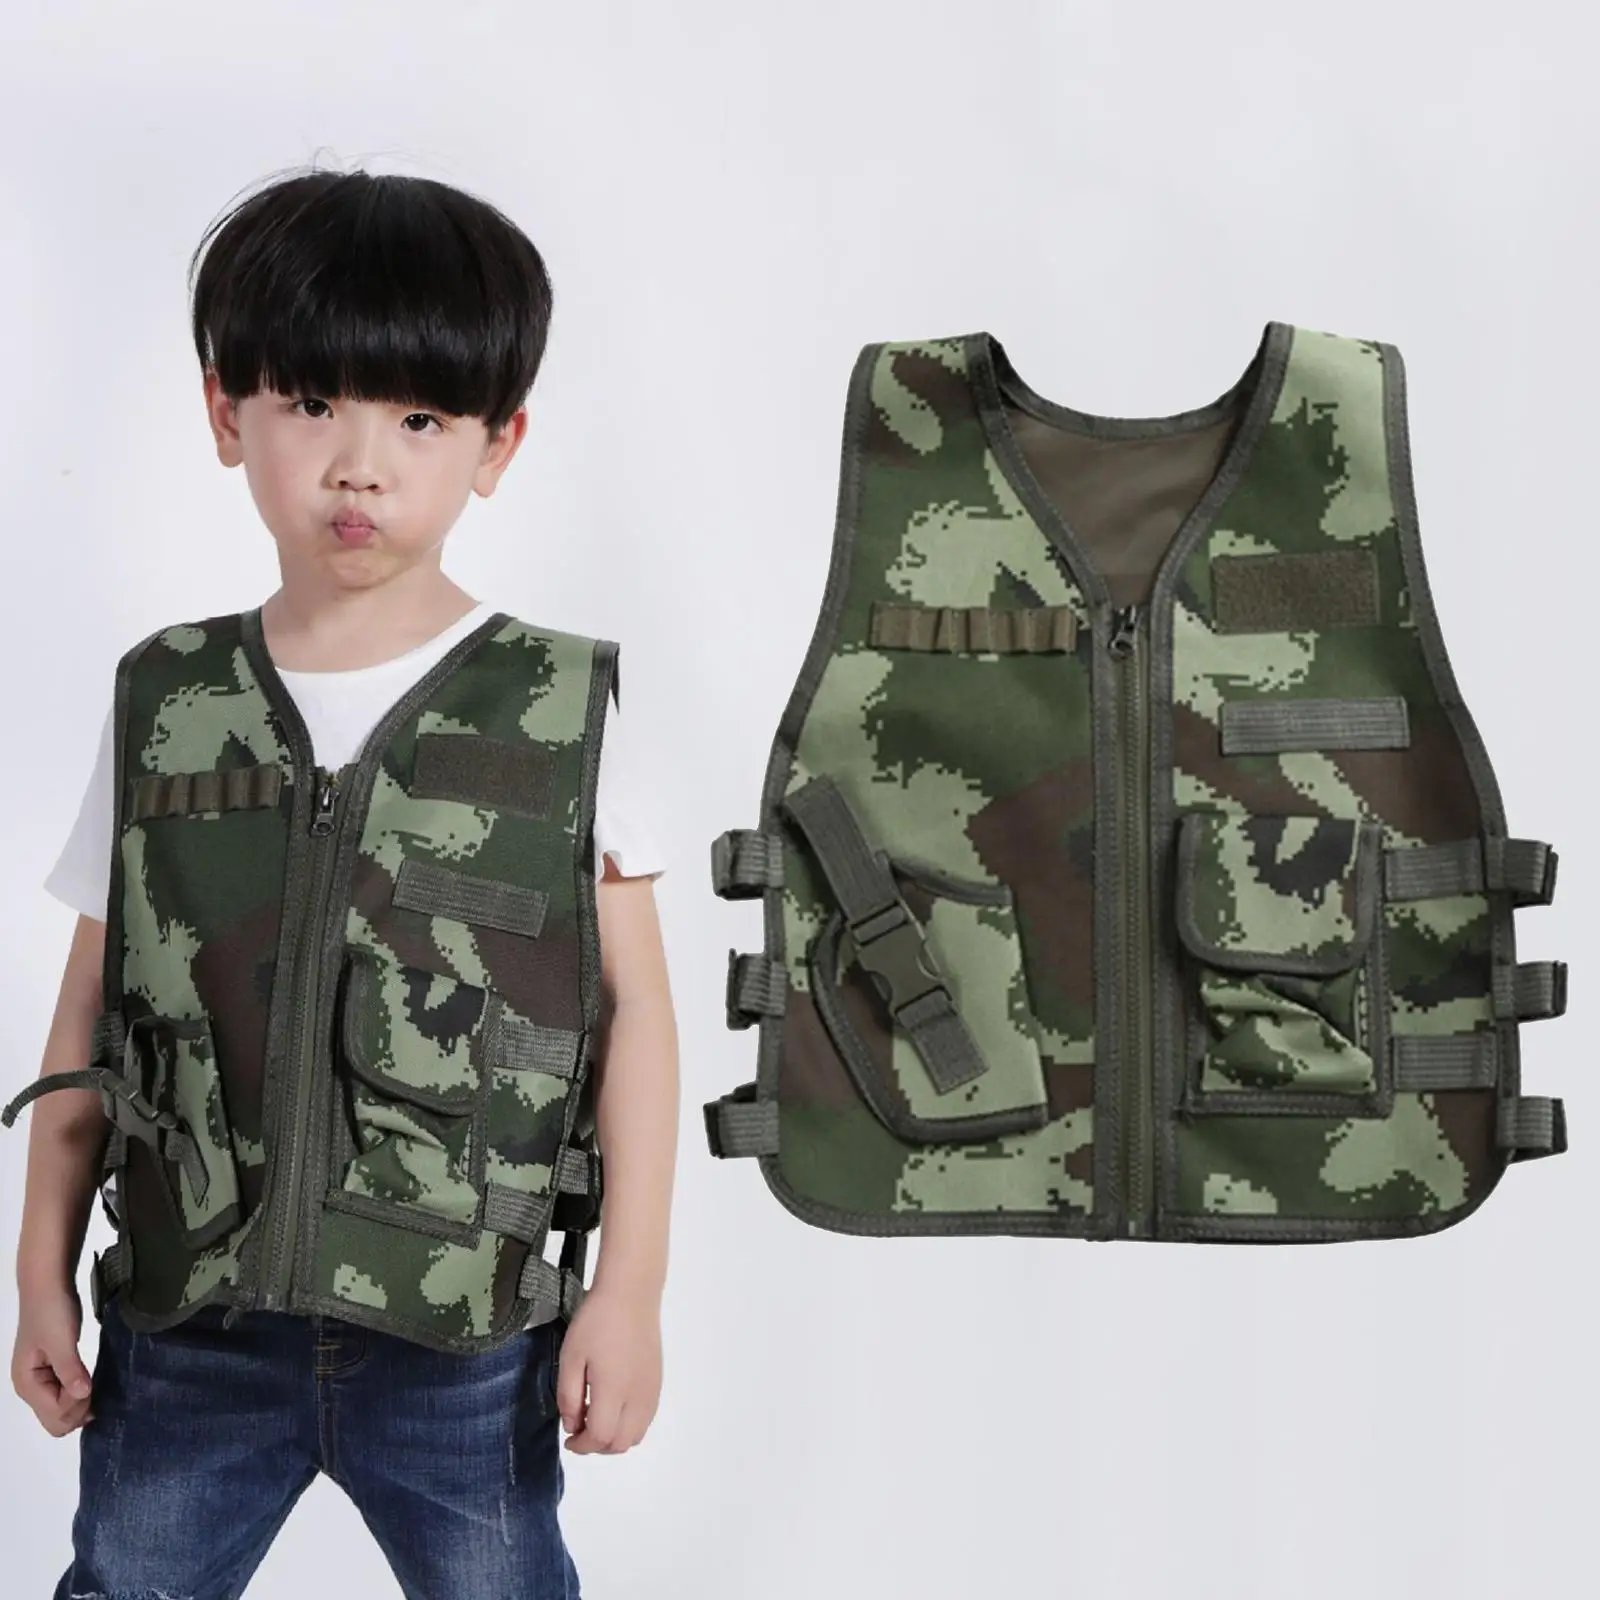 Protective Kids Children  Outdoor Training Gilet Equipment Safety Gear for Hunting, CS Gaming, Teens Shooting